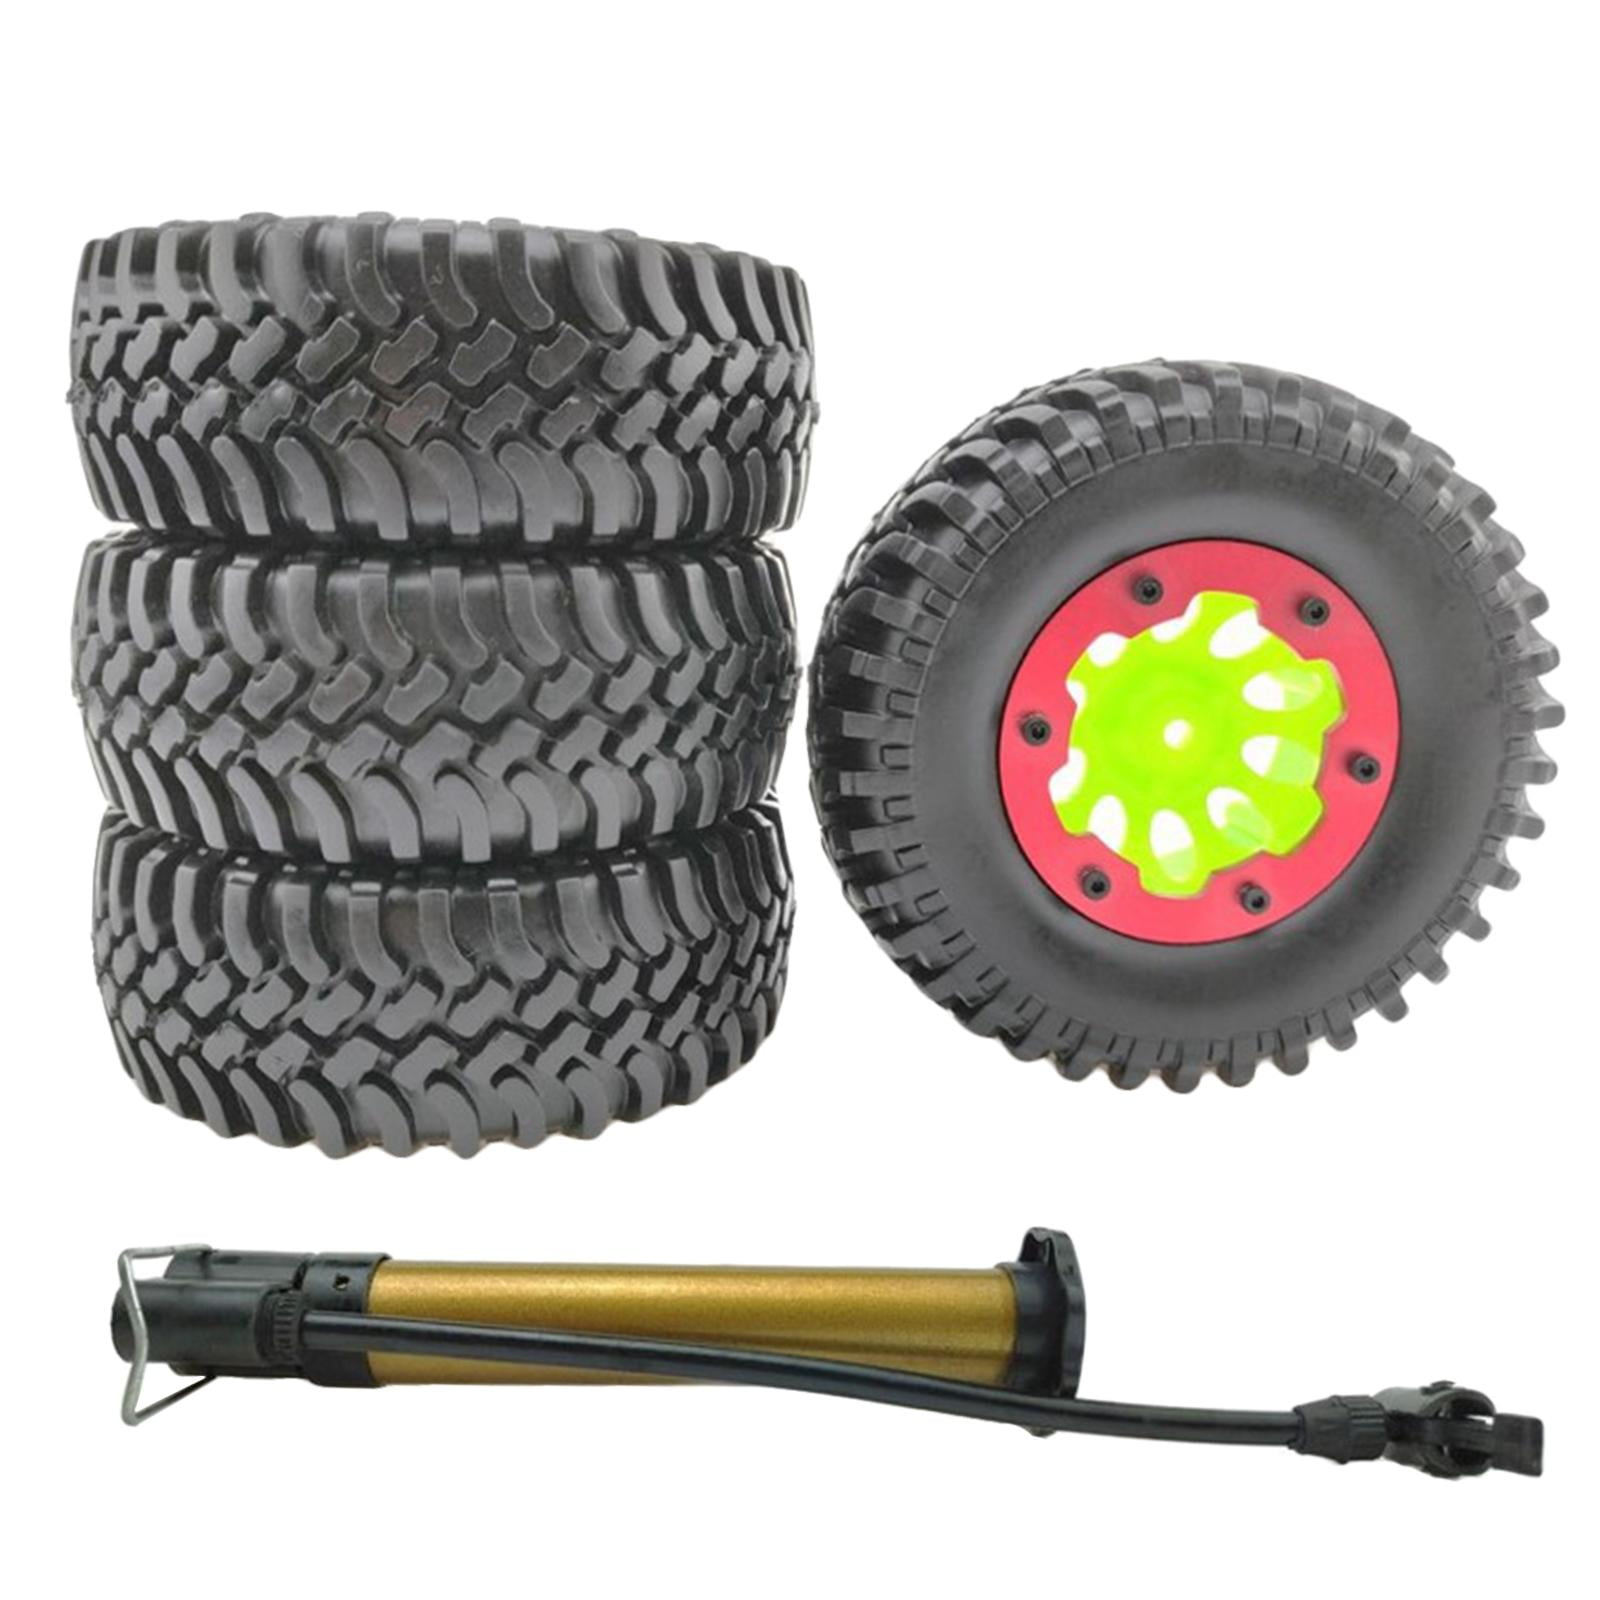 Dilwe 1.9 inch RC Car Tire 4pcs 45mm RC Crawler Car Rubber Tire Wheel Tyre with Sponge 120mm 